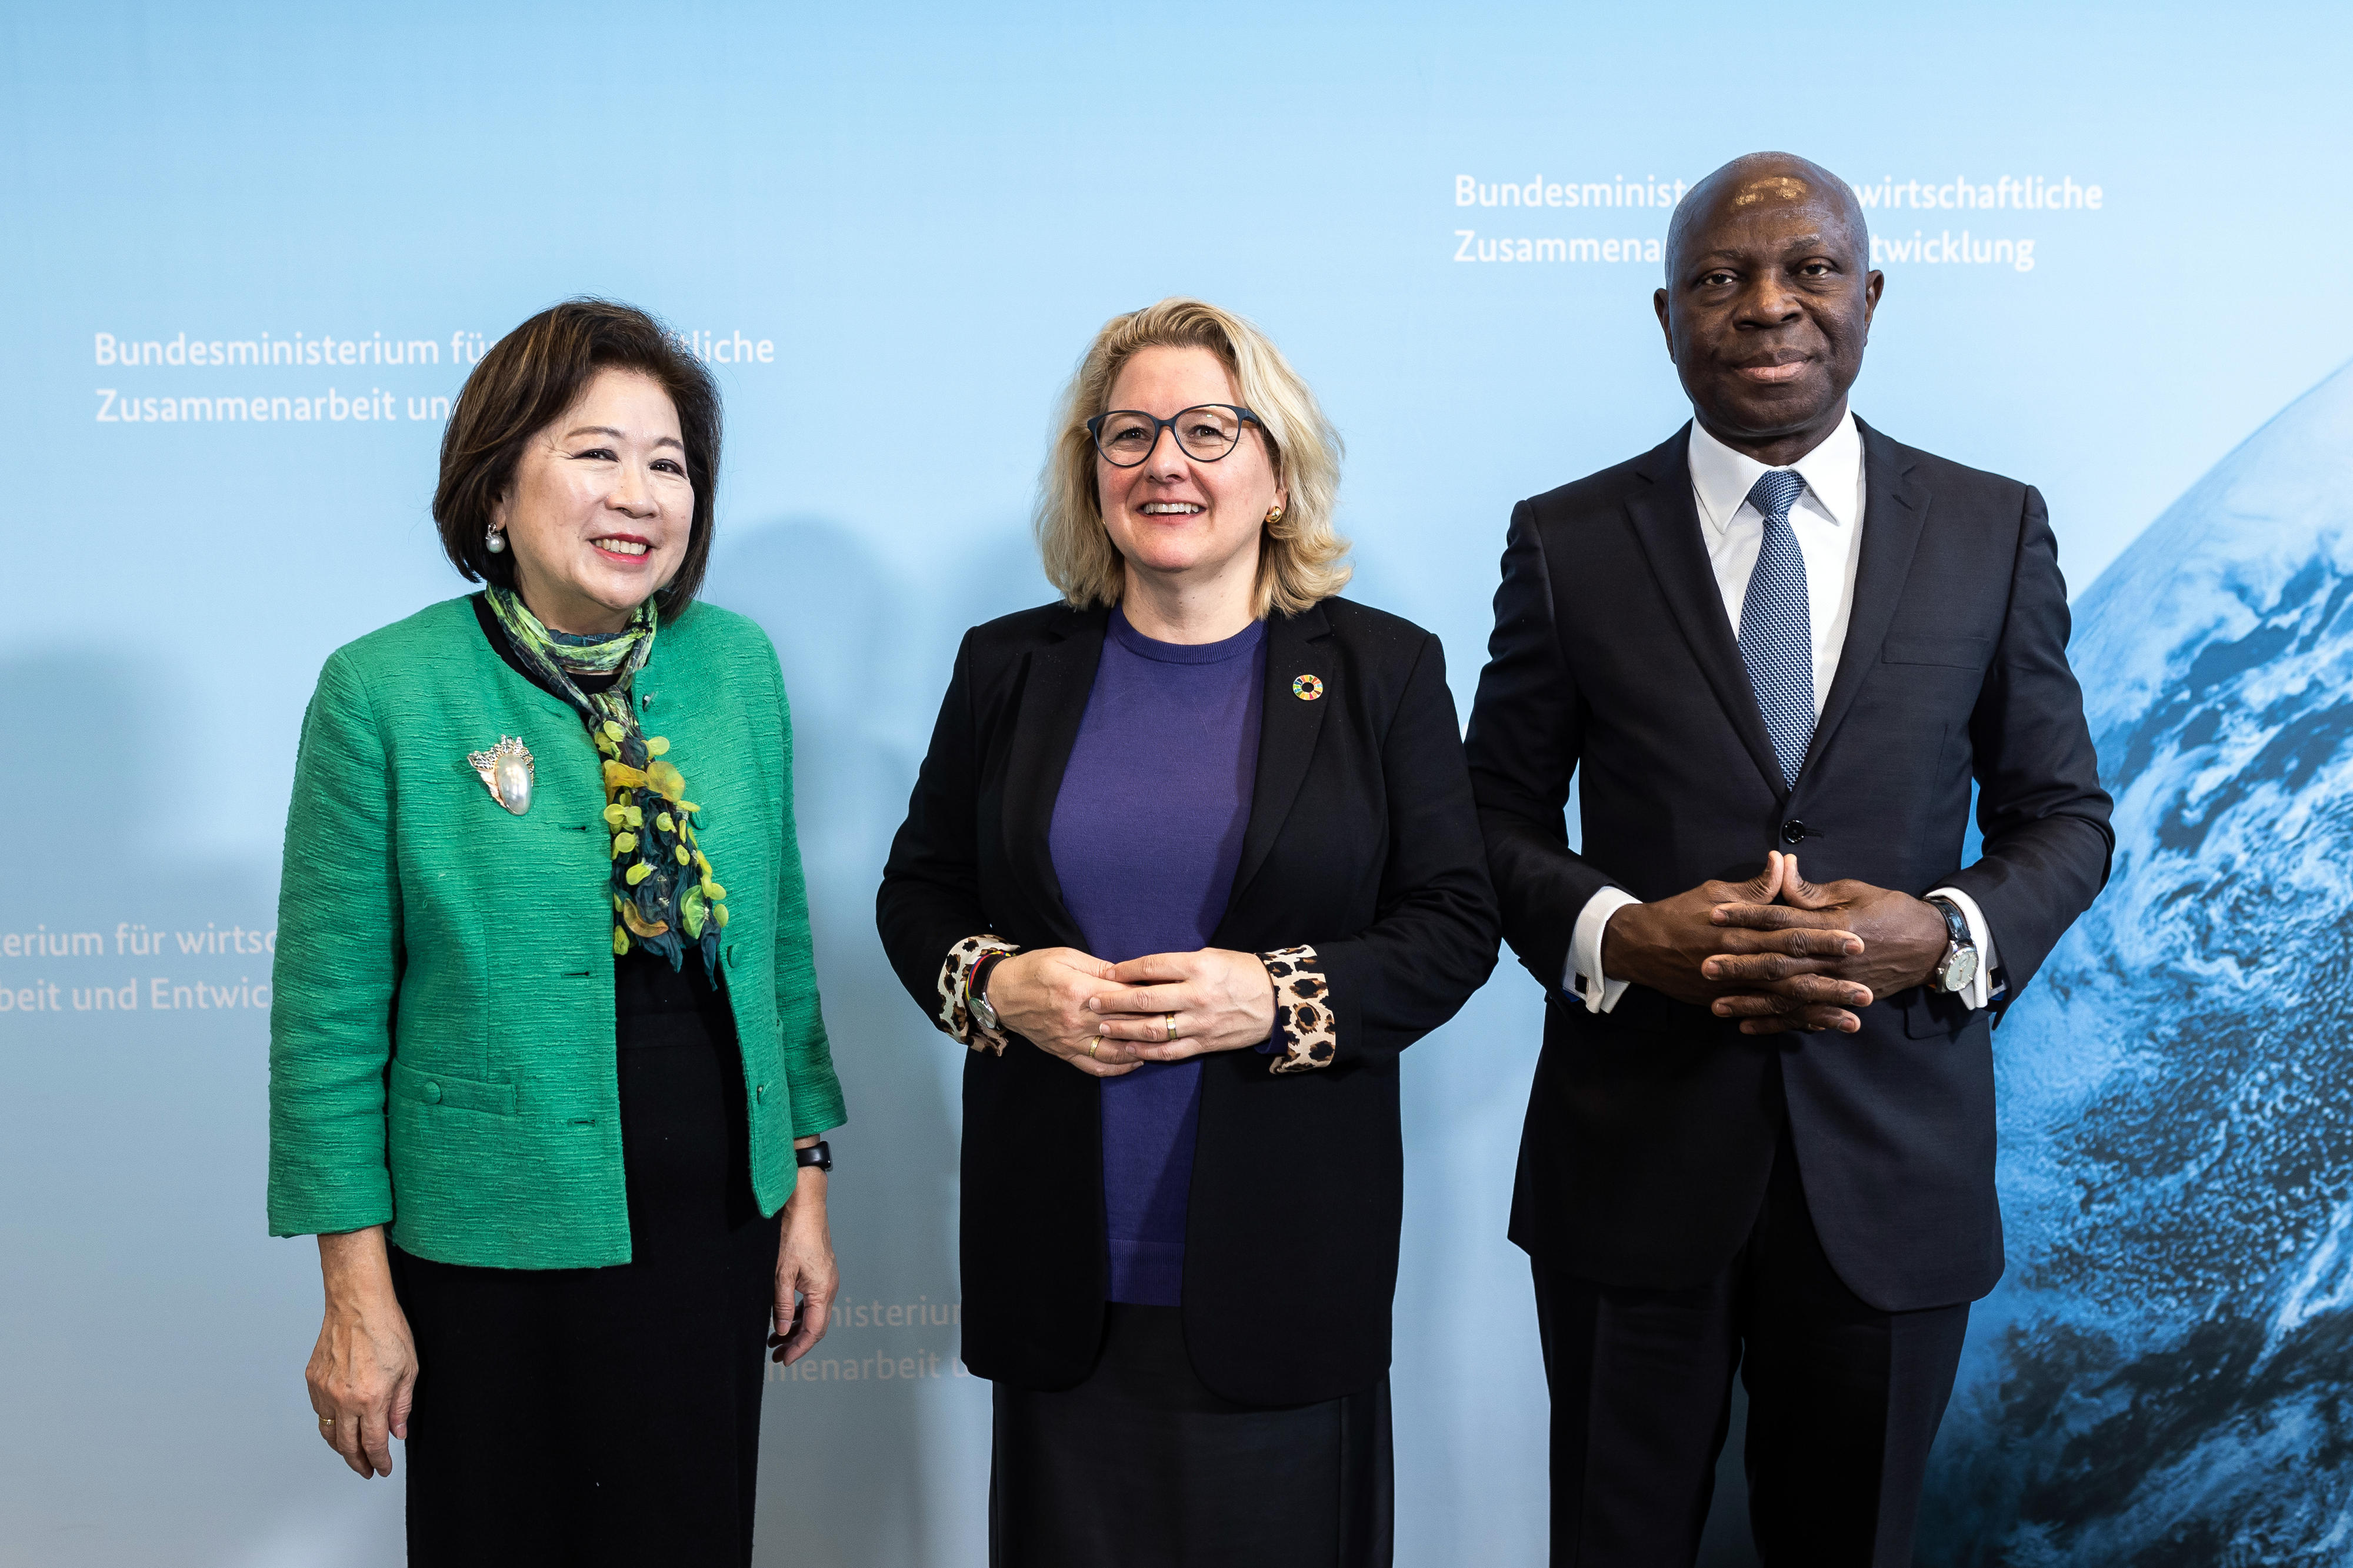 Mari Pangestu, Managing Director Development Policy and Partnerships of the World Bank, Federal Minister Svenja Schulze and Gilbert Houngbo, Director-General of the ILO, at the press conference on 29 November 2022 in Berlin on deepening cooperation between BMZ, ILO and the World Bank in the field of social protection.